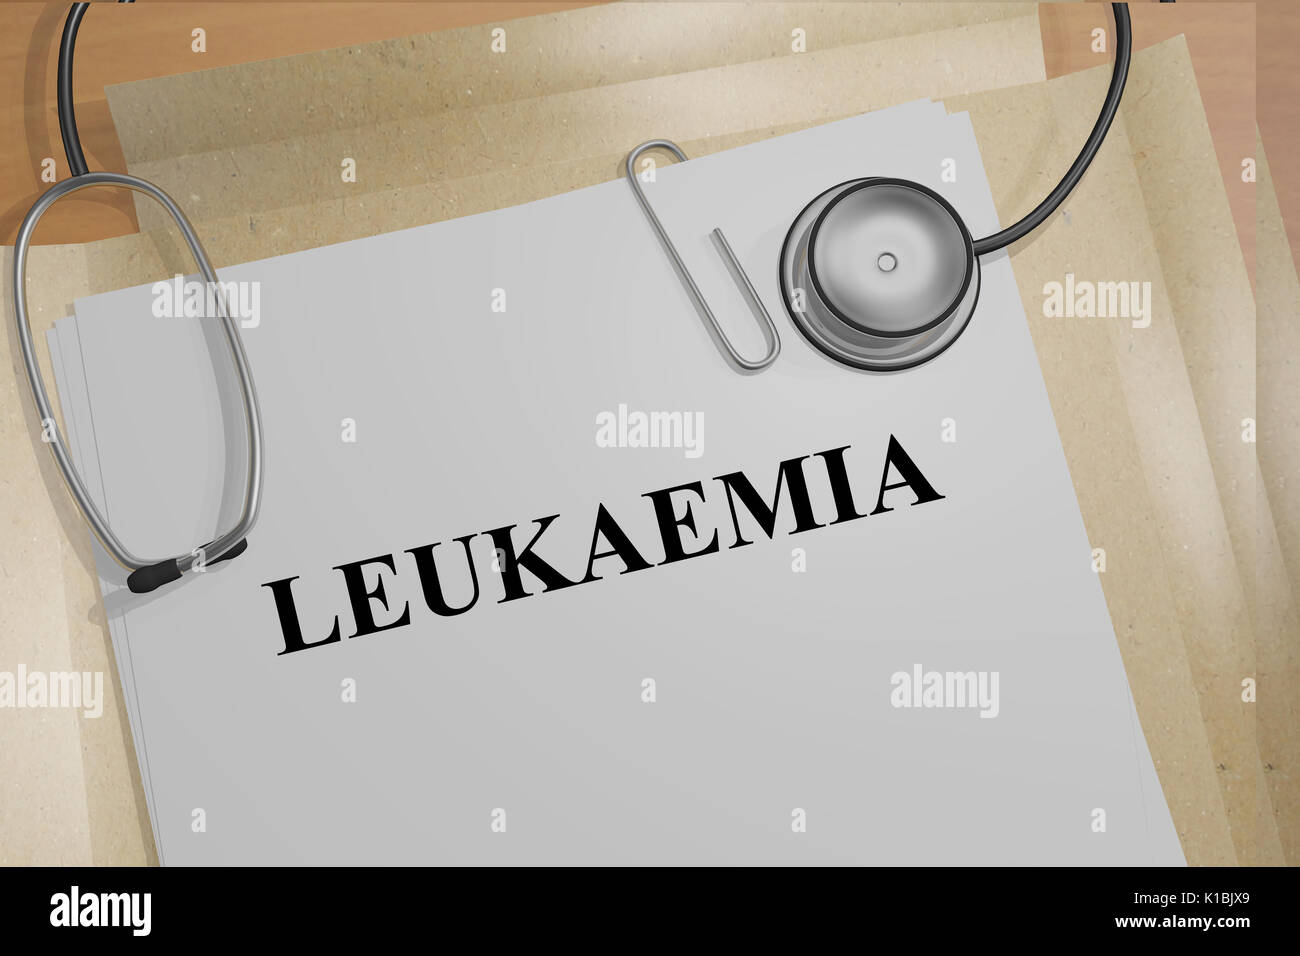 3D illustration of LEUKAEMIA title on medical documents. Medicial concept. Stock Photo